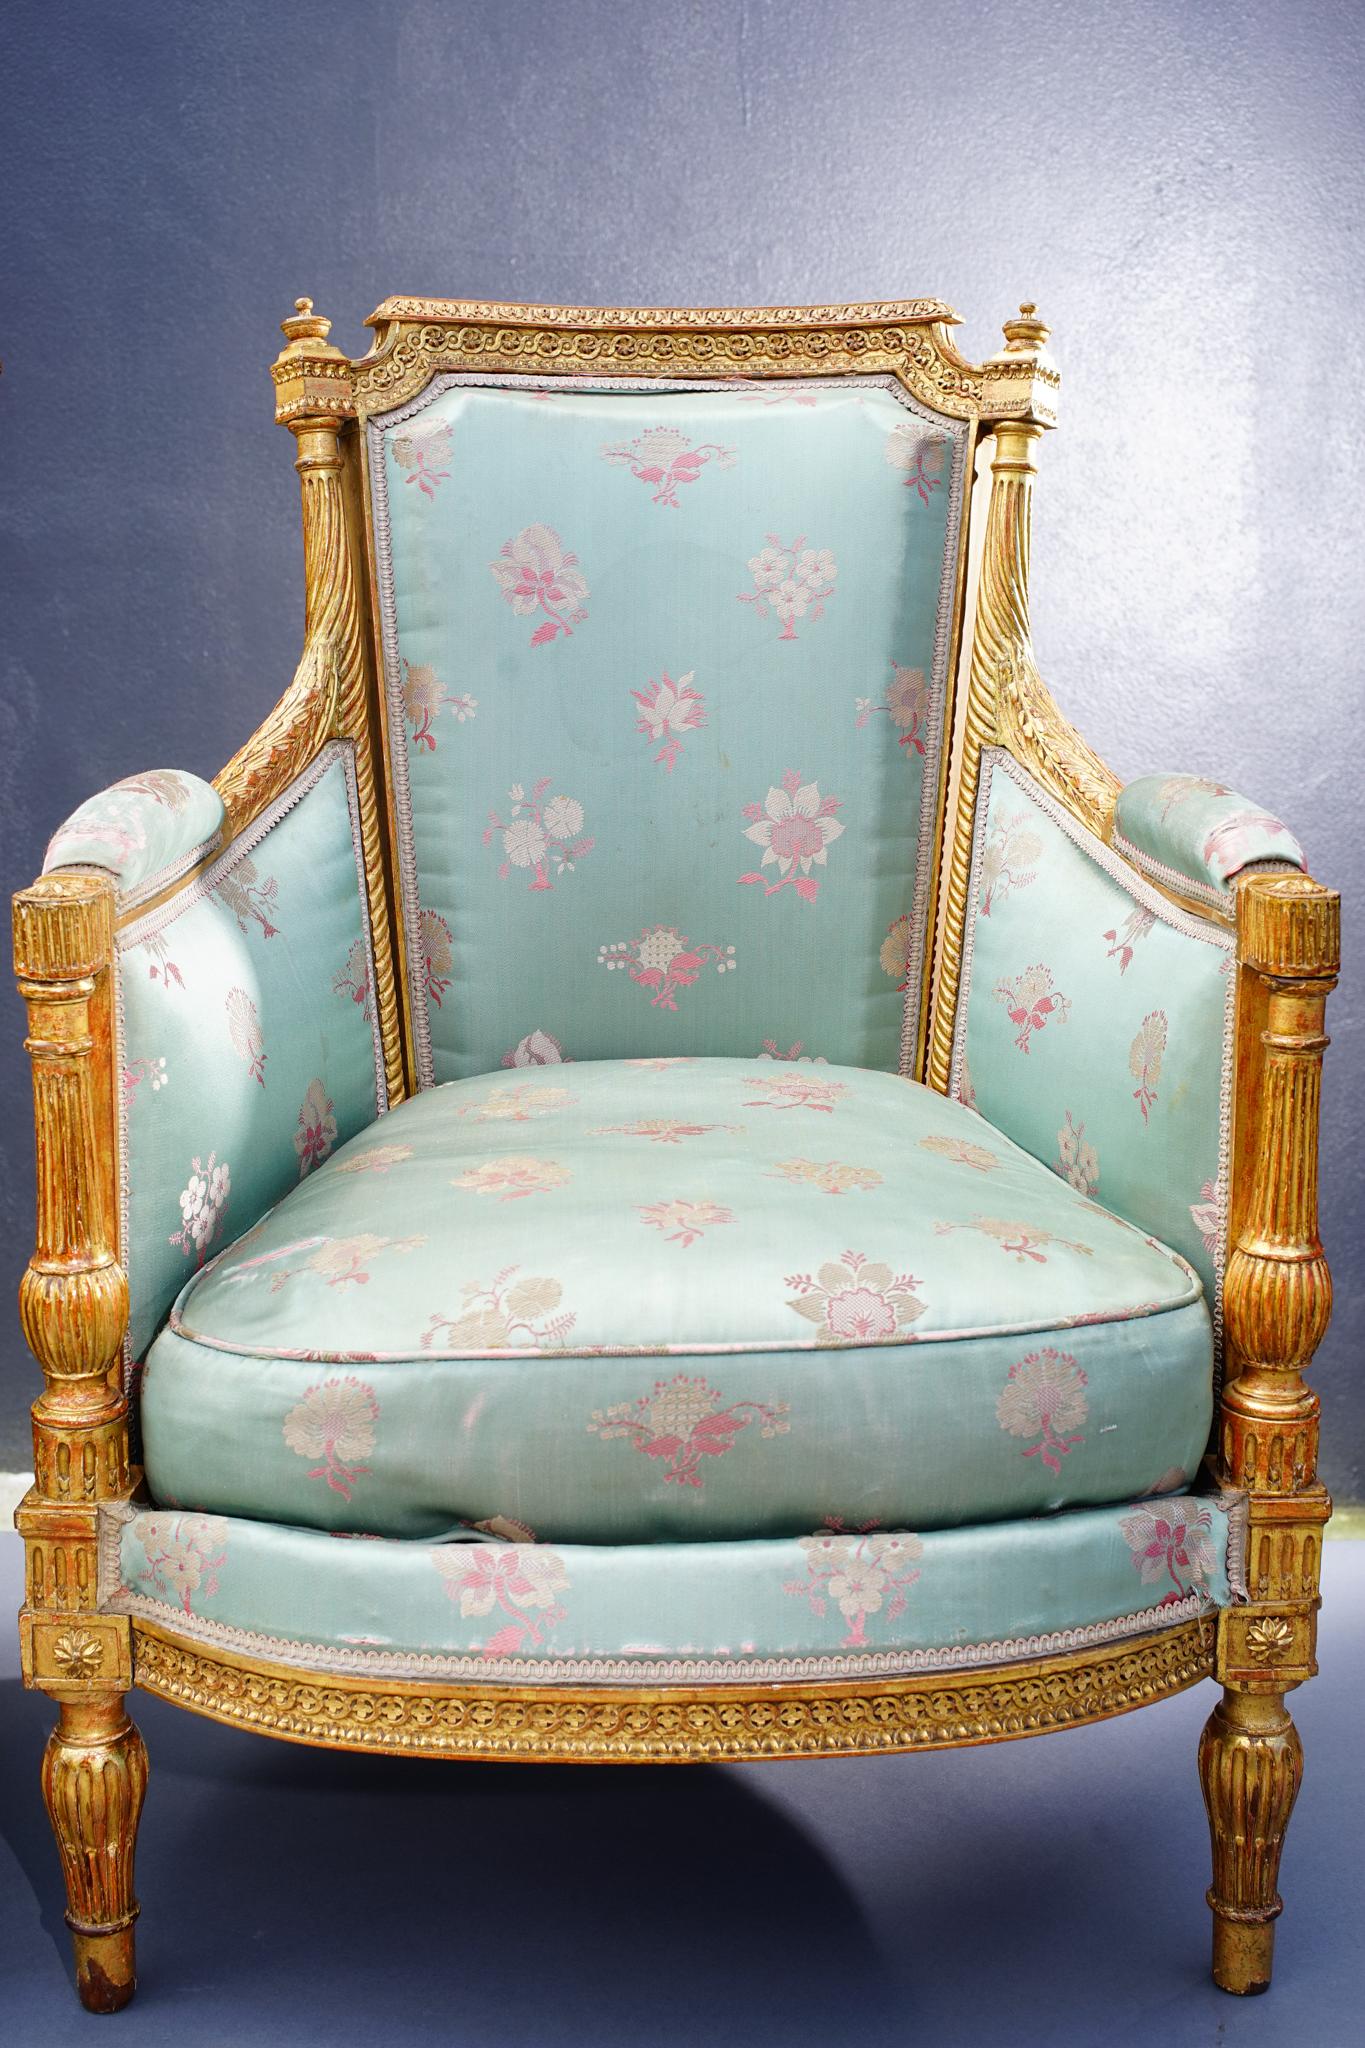 Very finely carved 19th century French giltwood armchairs upholstered in vintage silk.